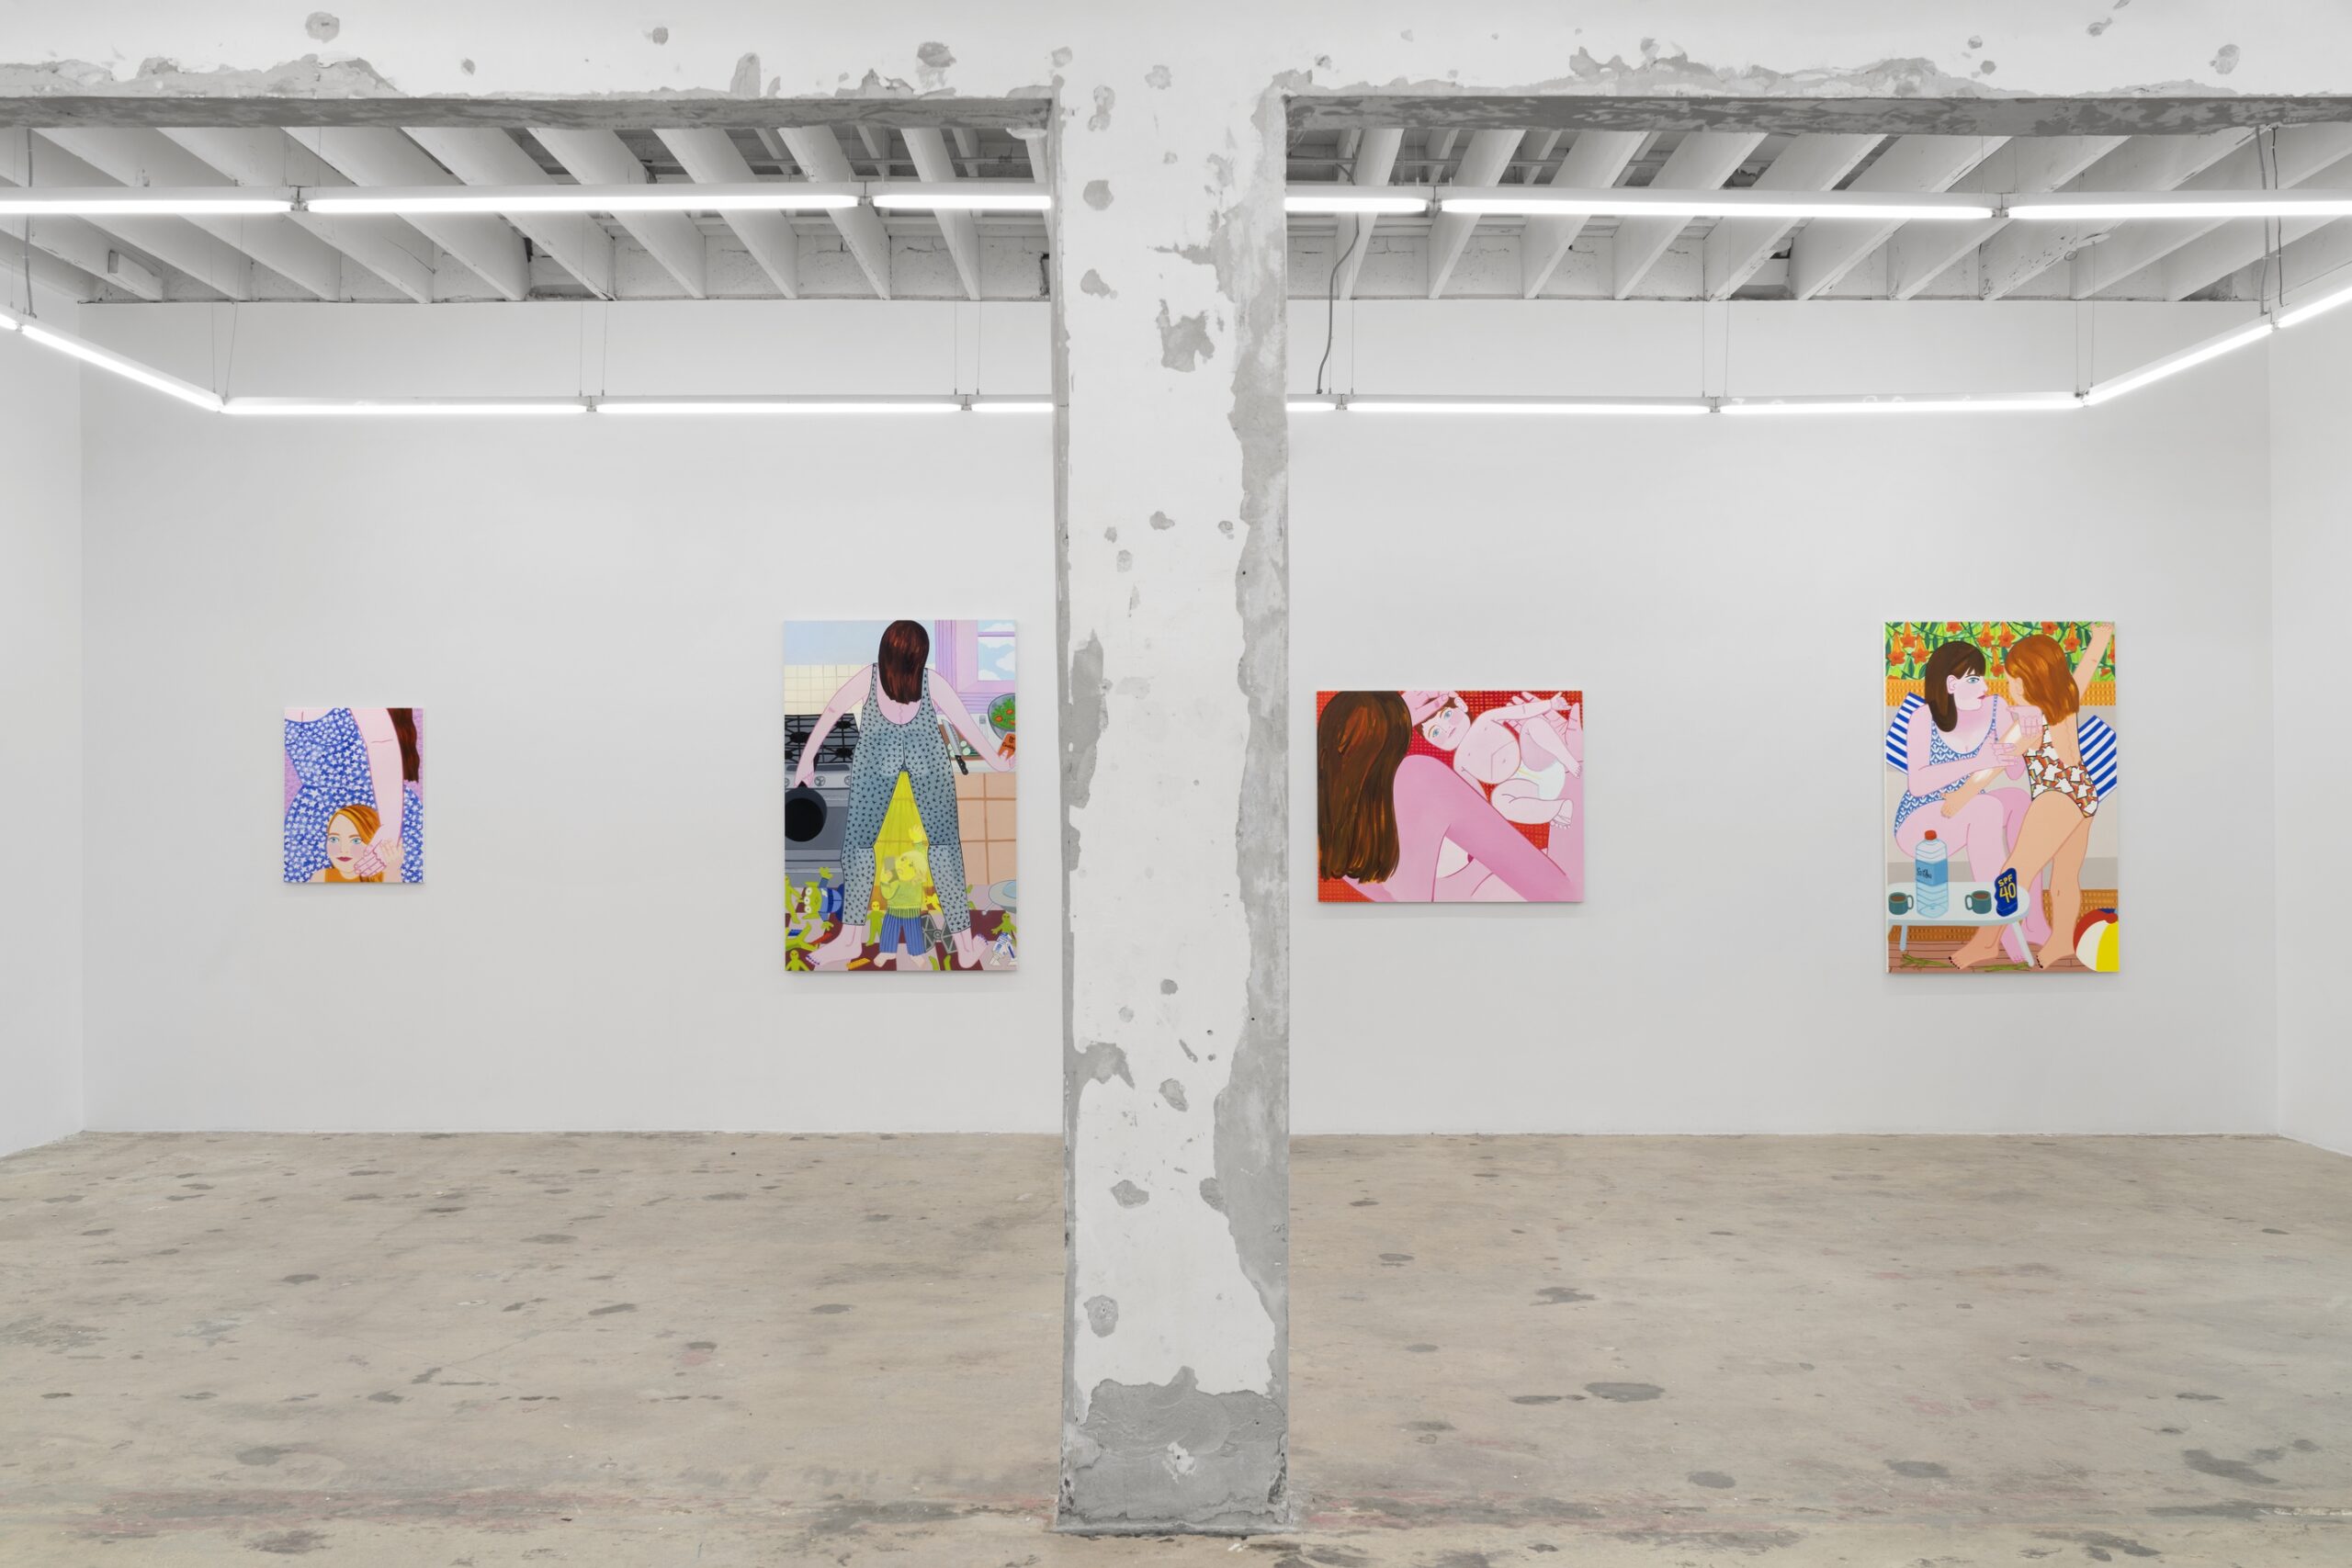 Installation view of Madeline Donahue: Present Tense on view in the Front Gallery. Photographed are oil on canvas paintings titled "Sunscreen," "Circle," "Beam Me Up," and "Hip Height."